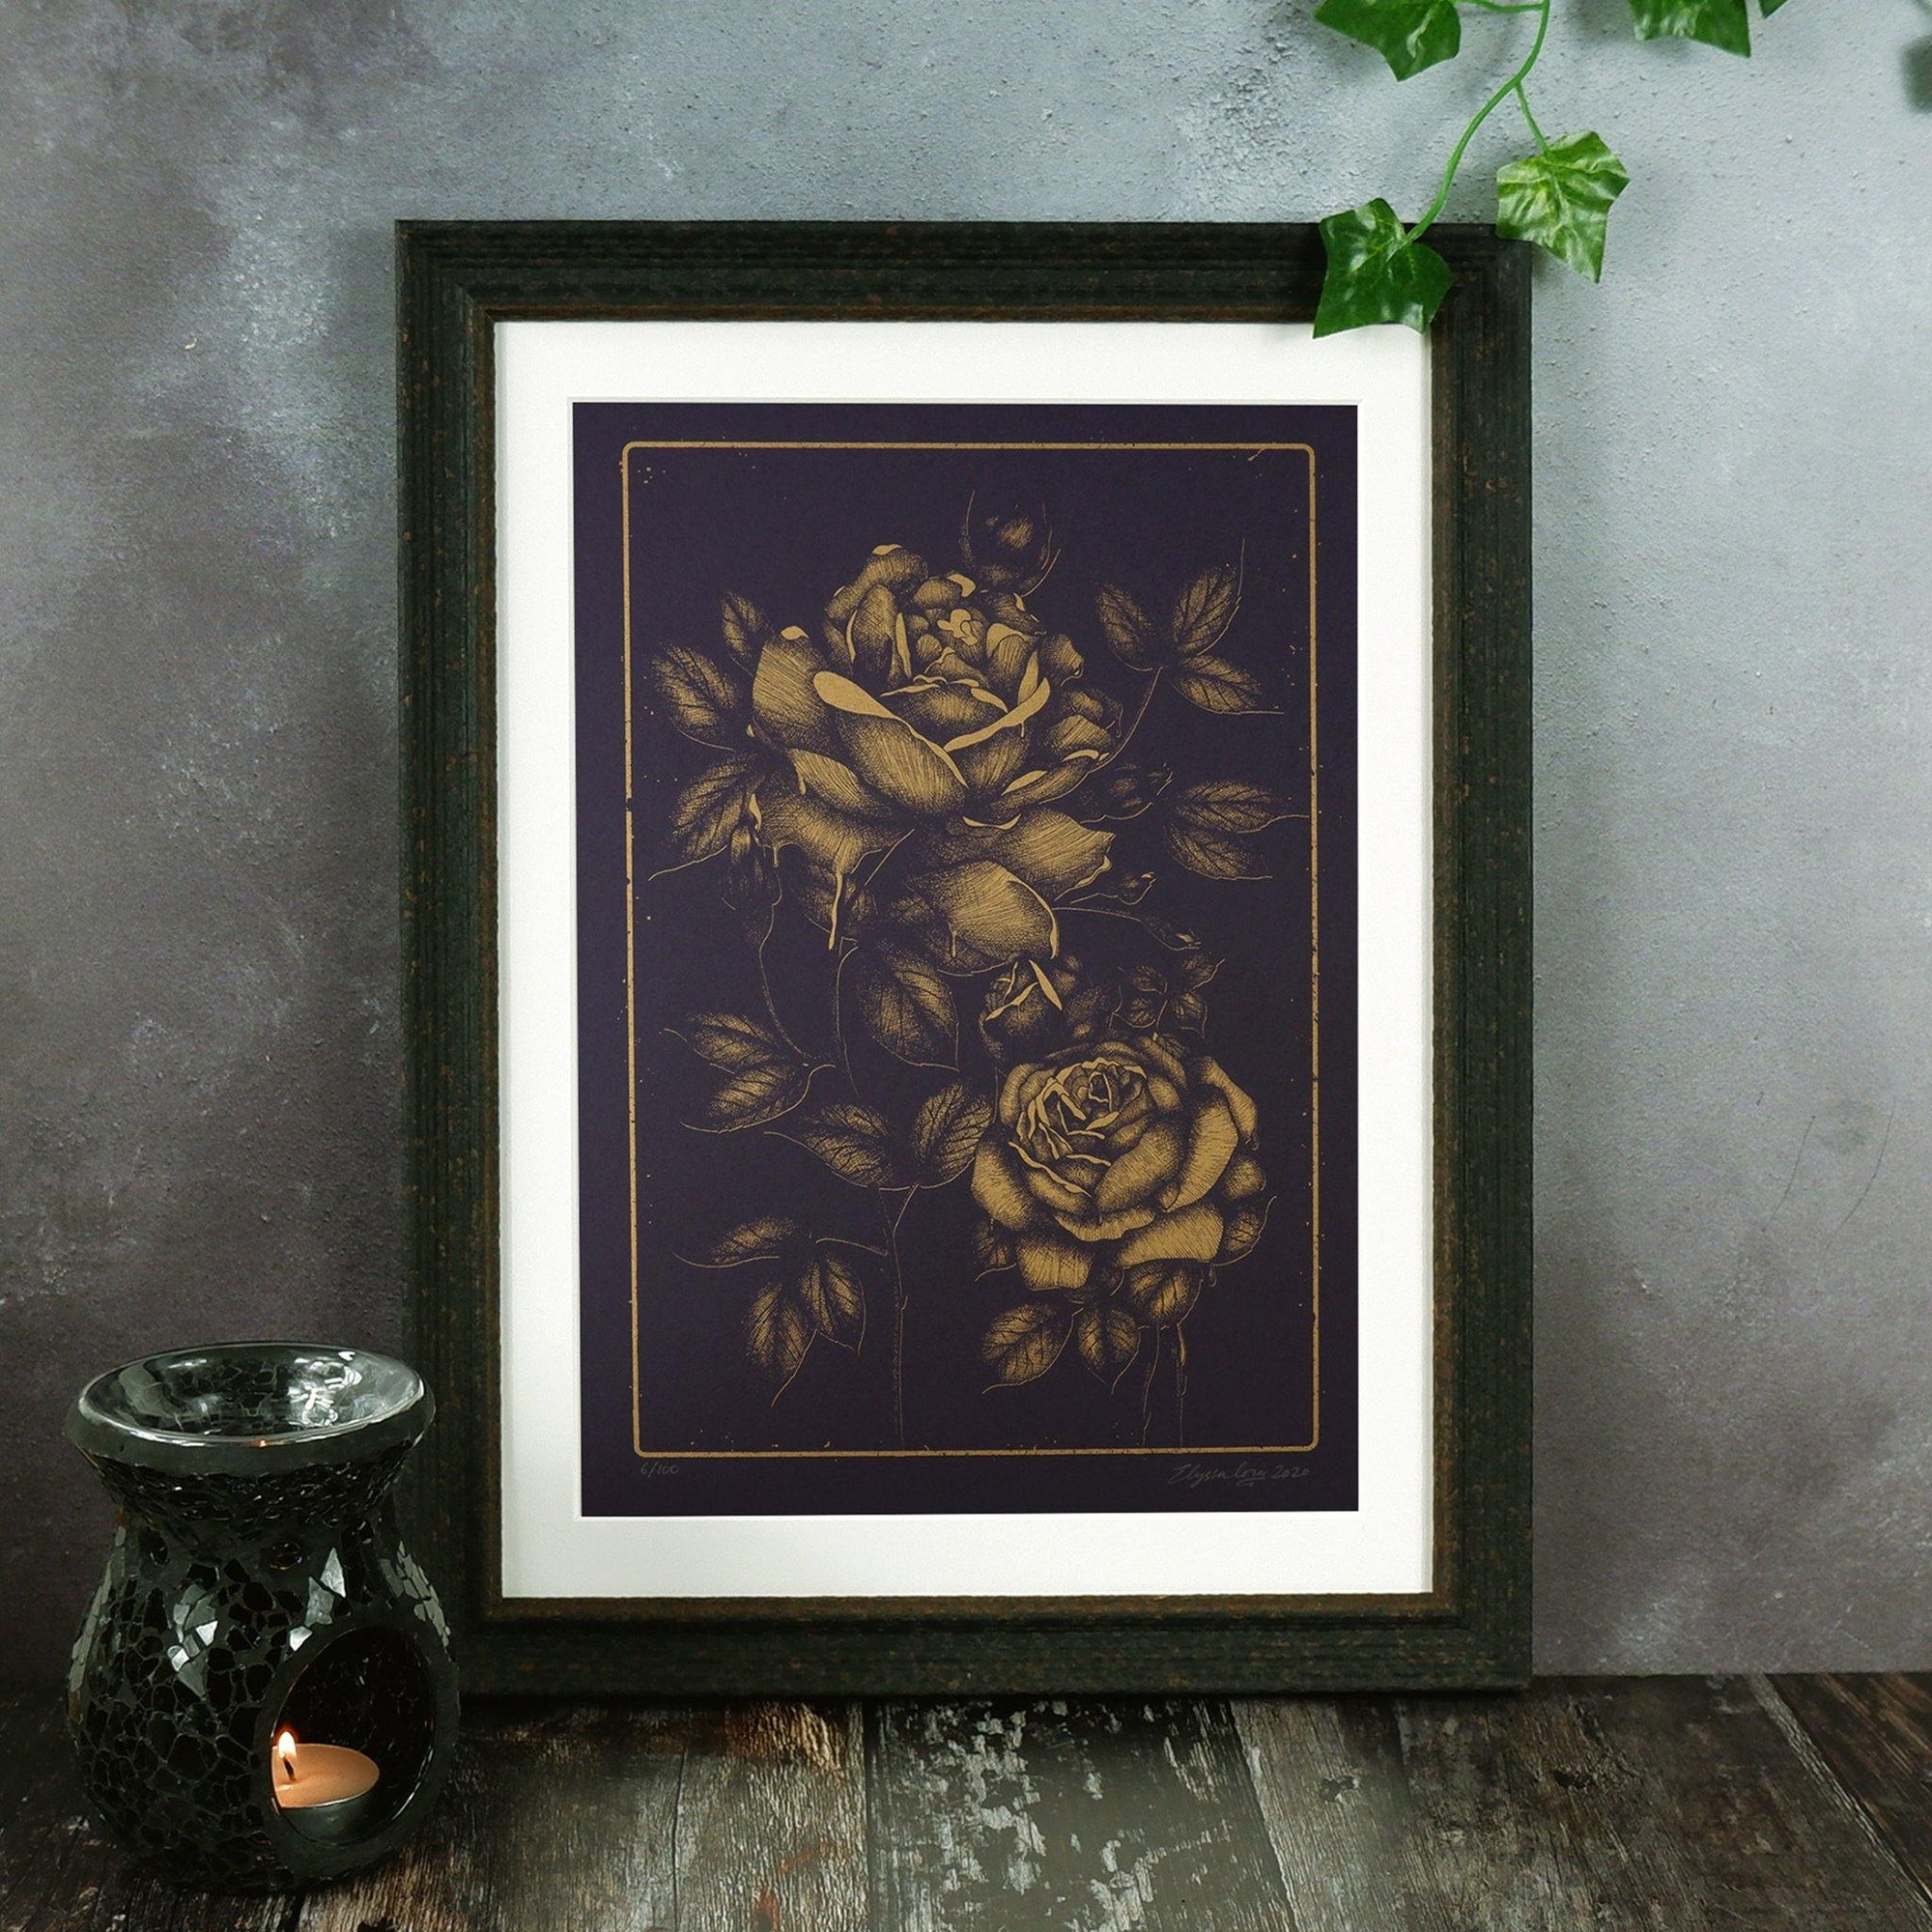 Bleeding Roses - Limited Edition Risograph Print - Print is Dead